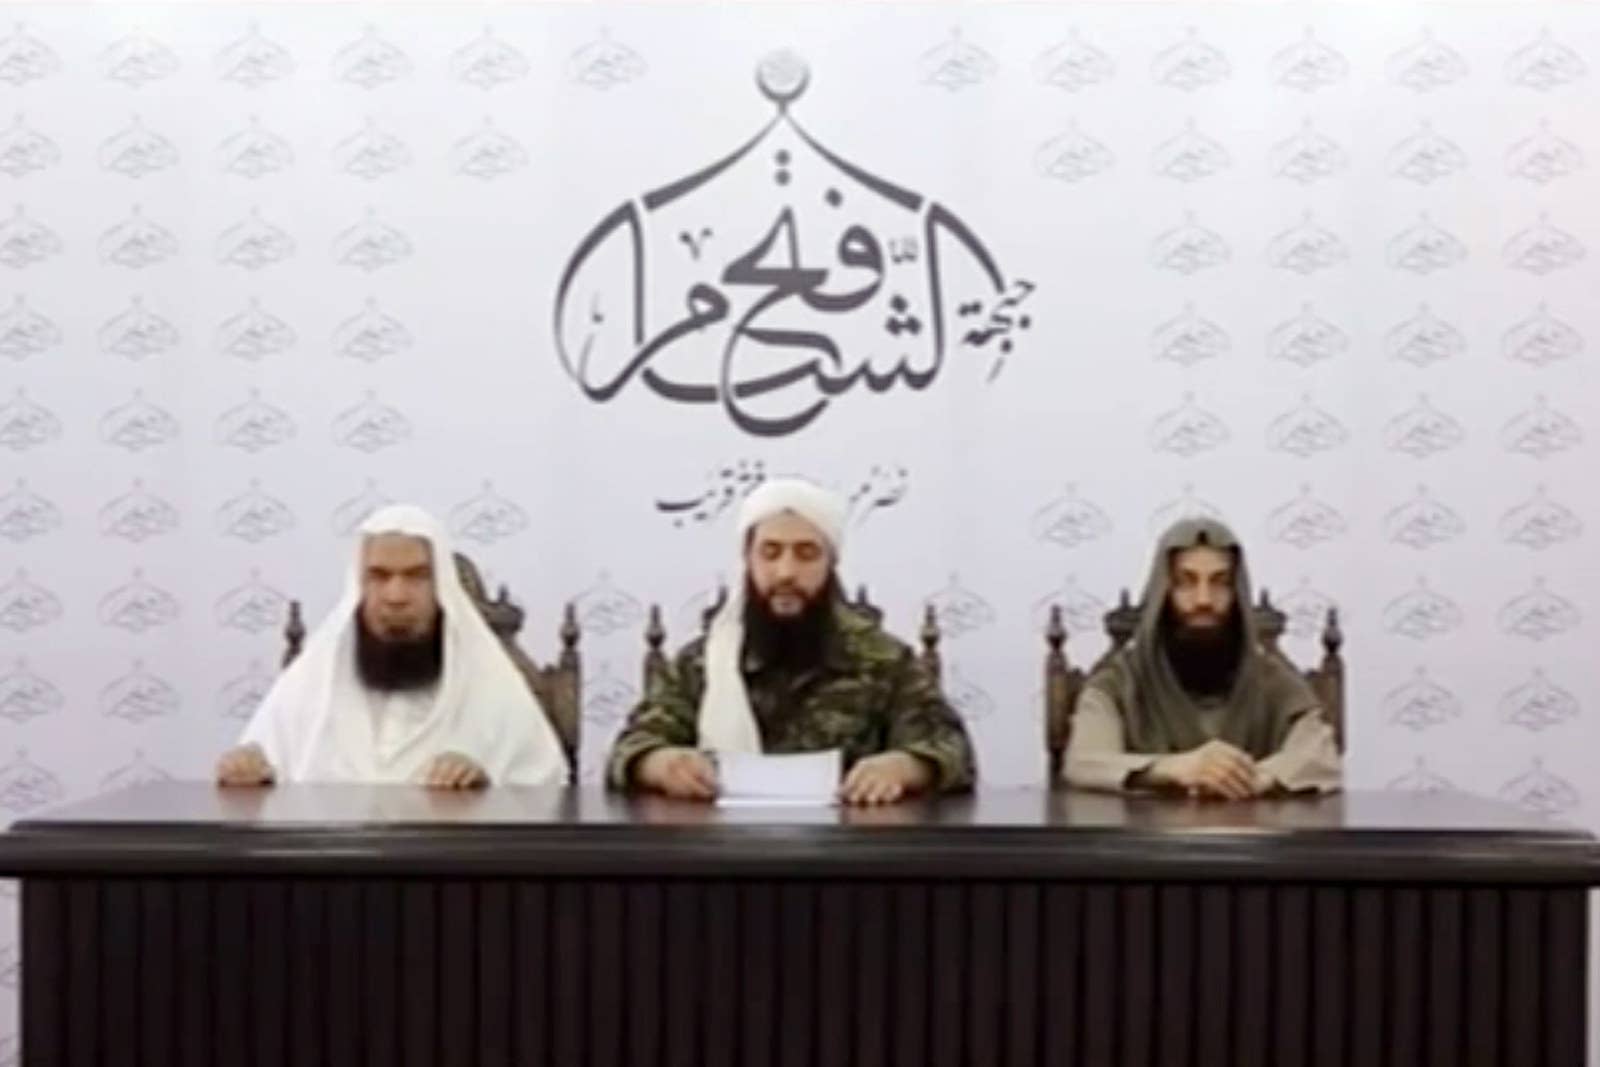 Abu Mohammad al-Julani, then the leader of the Syrian al-Qaeda branch the al-Nusra Front, announcing in mid-2016 that the group is breaking ties with al-Qaeda and changing its name.